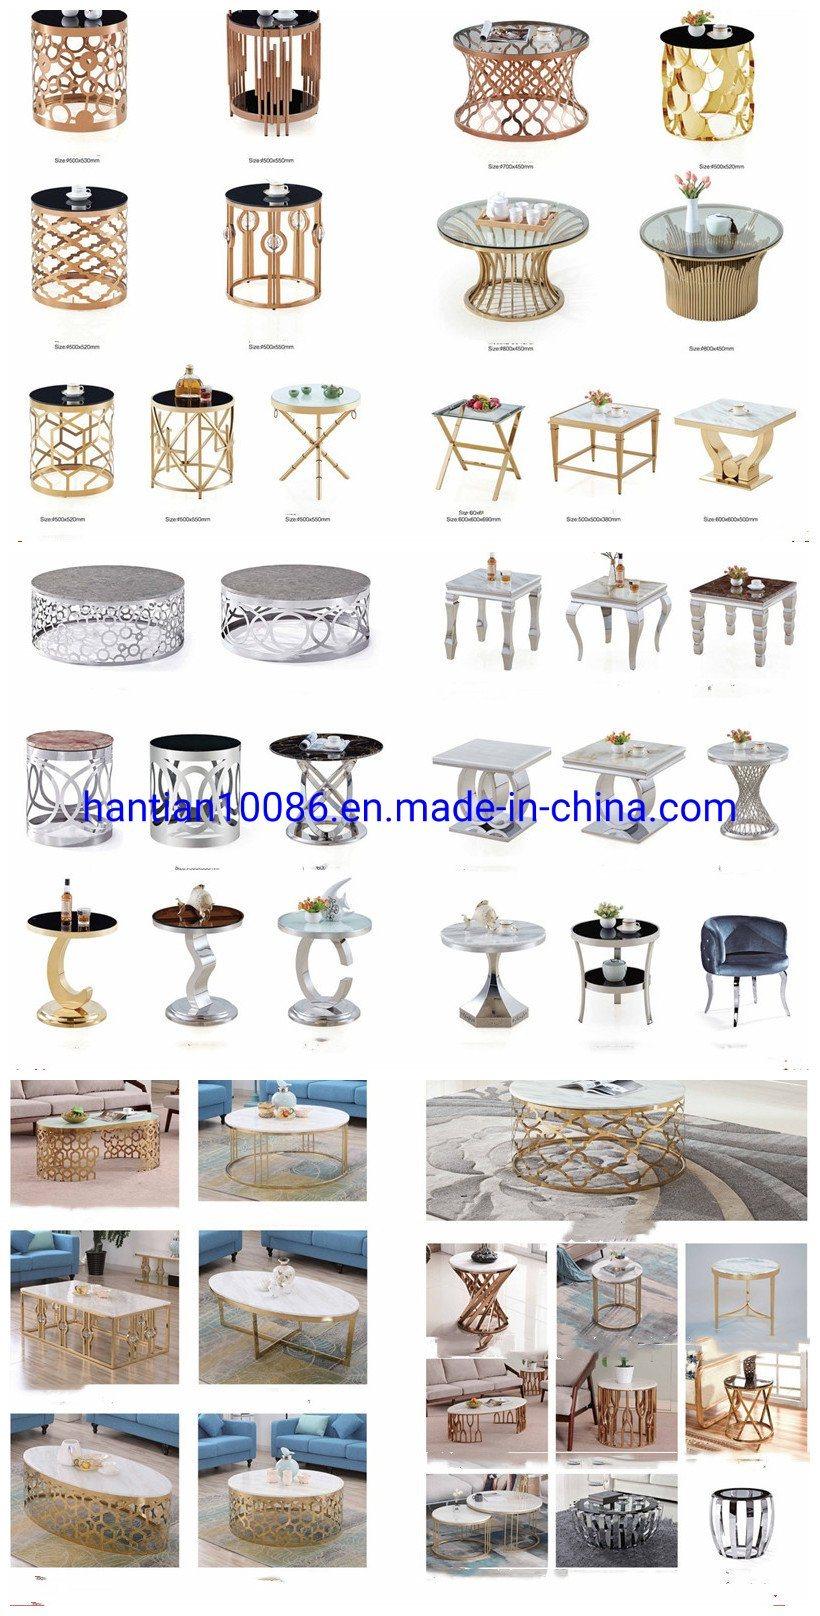 Hotel Hall Big Banquet Table Gold Steel Pictures Living Room Coffee Table